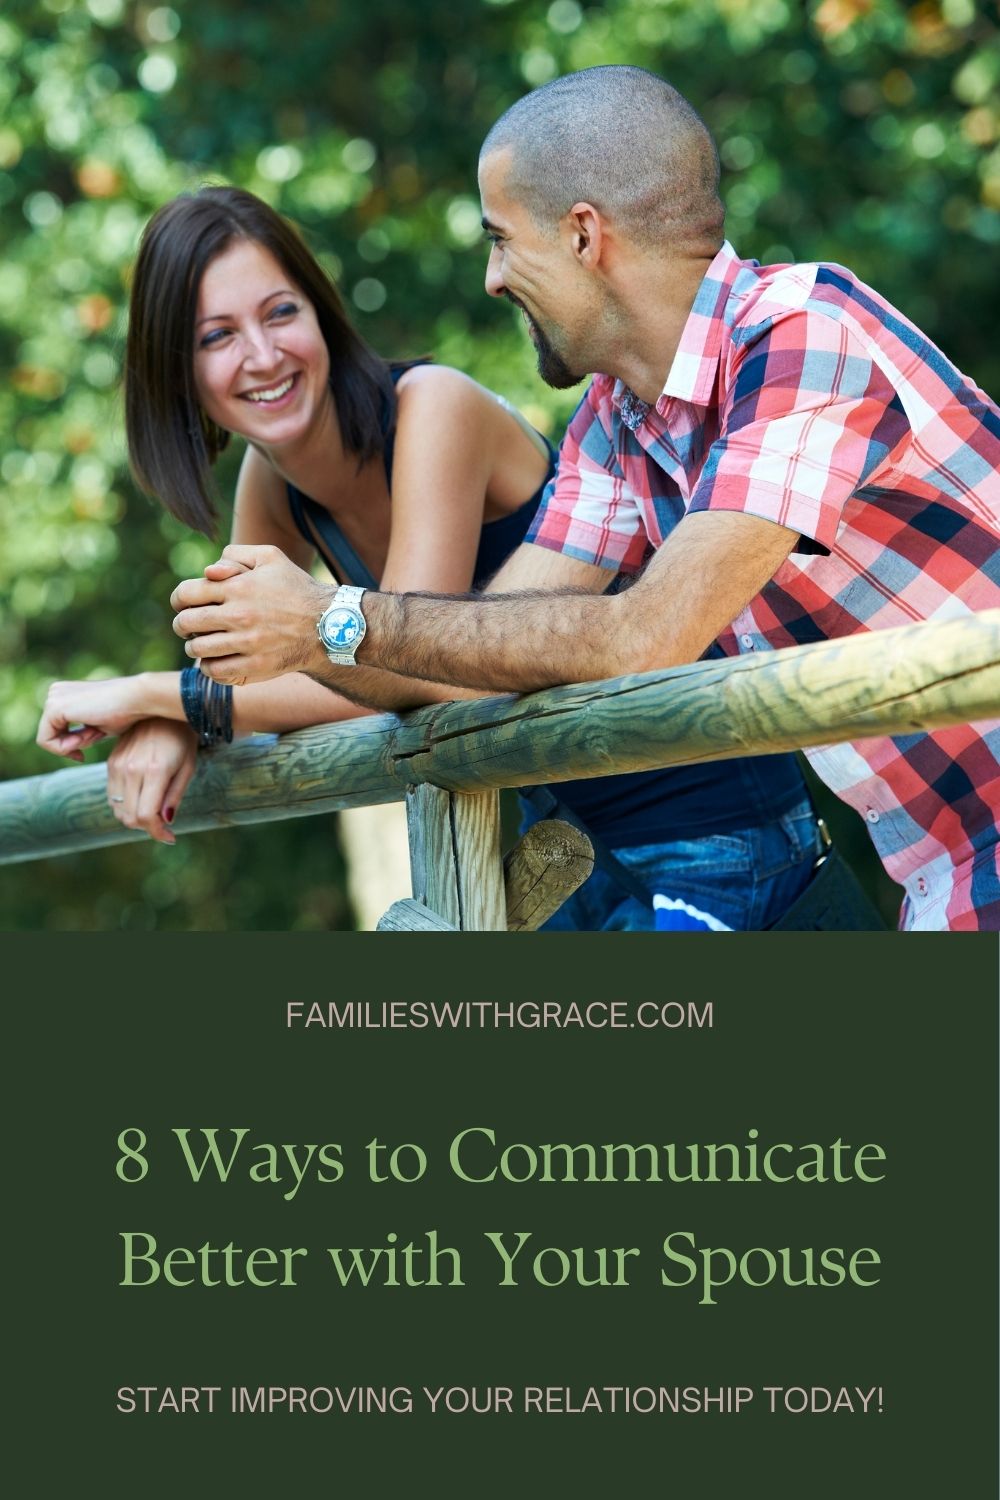 How to improve communication in your marriage